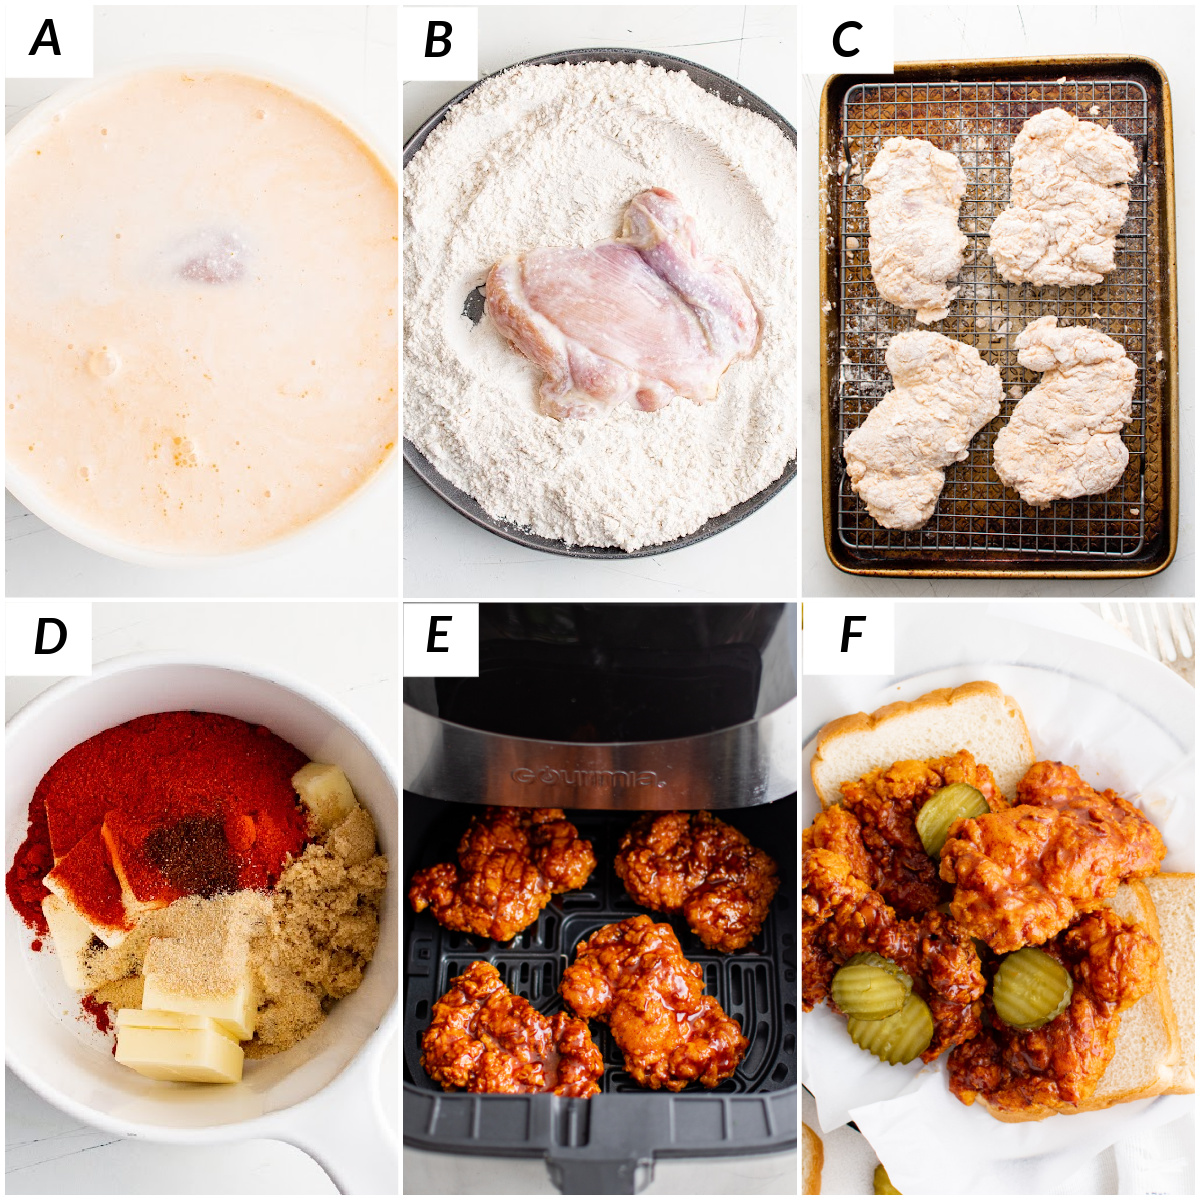 image collage showing the steps for making this nashville hot chicken air fryer recipe